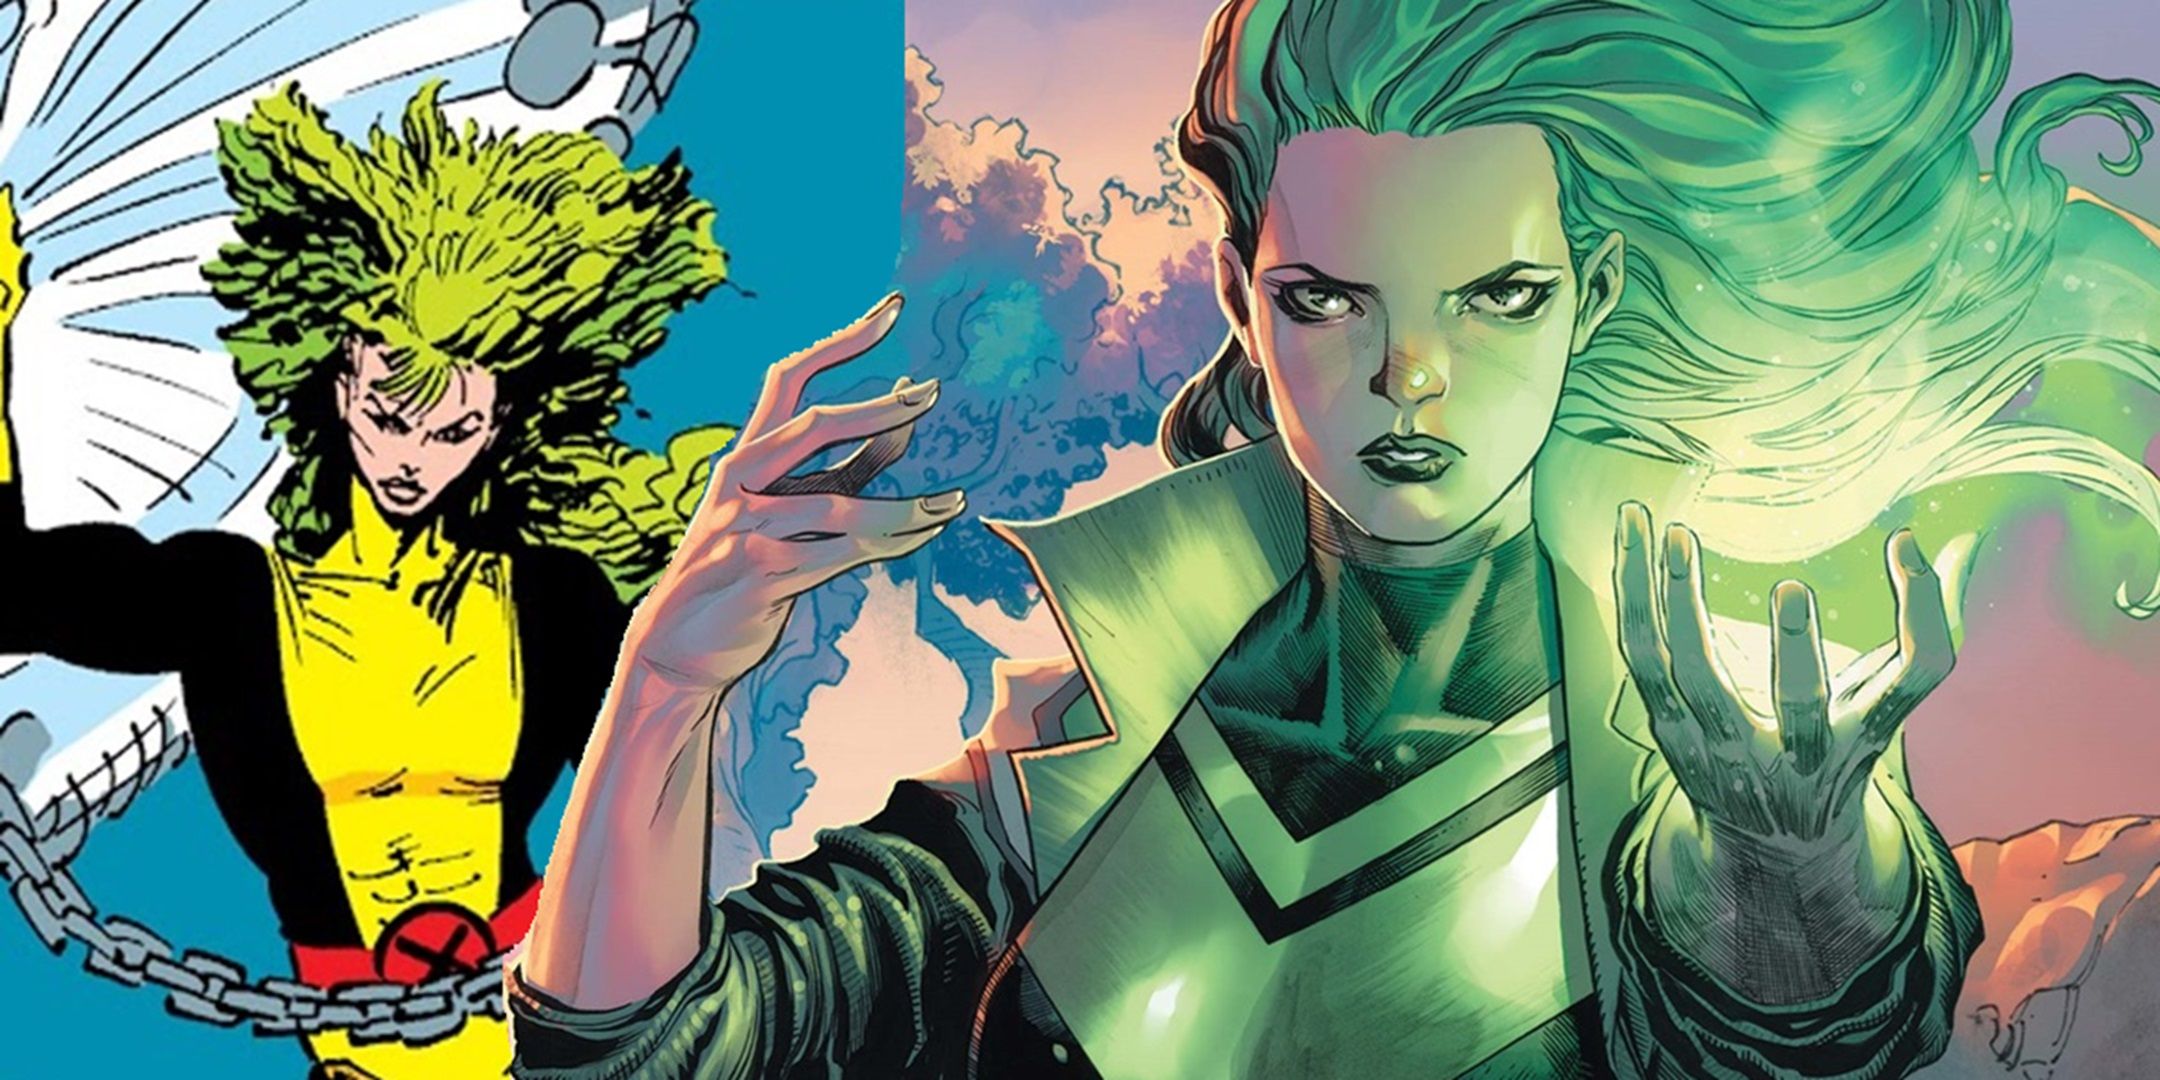 Polaris with her two powers